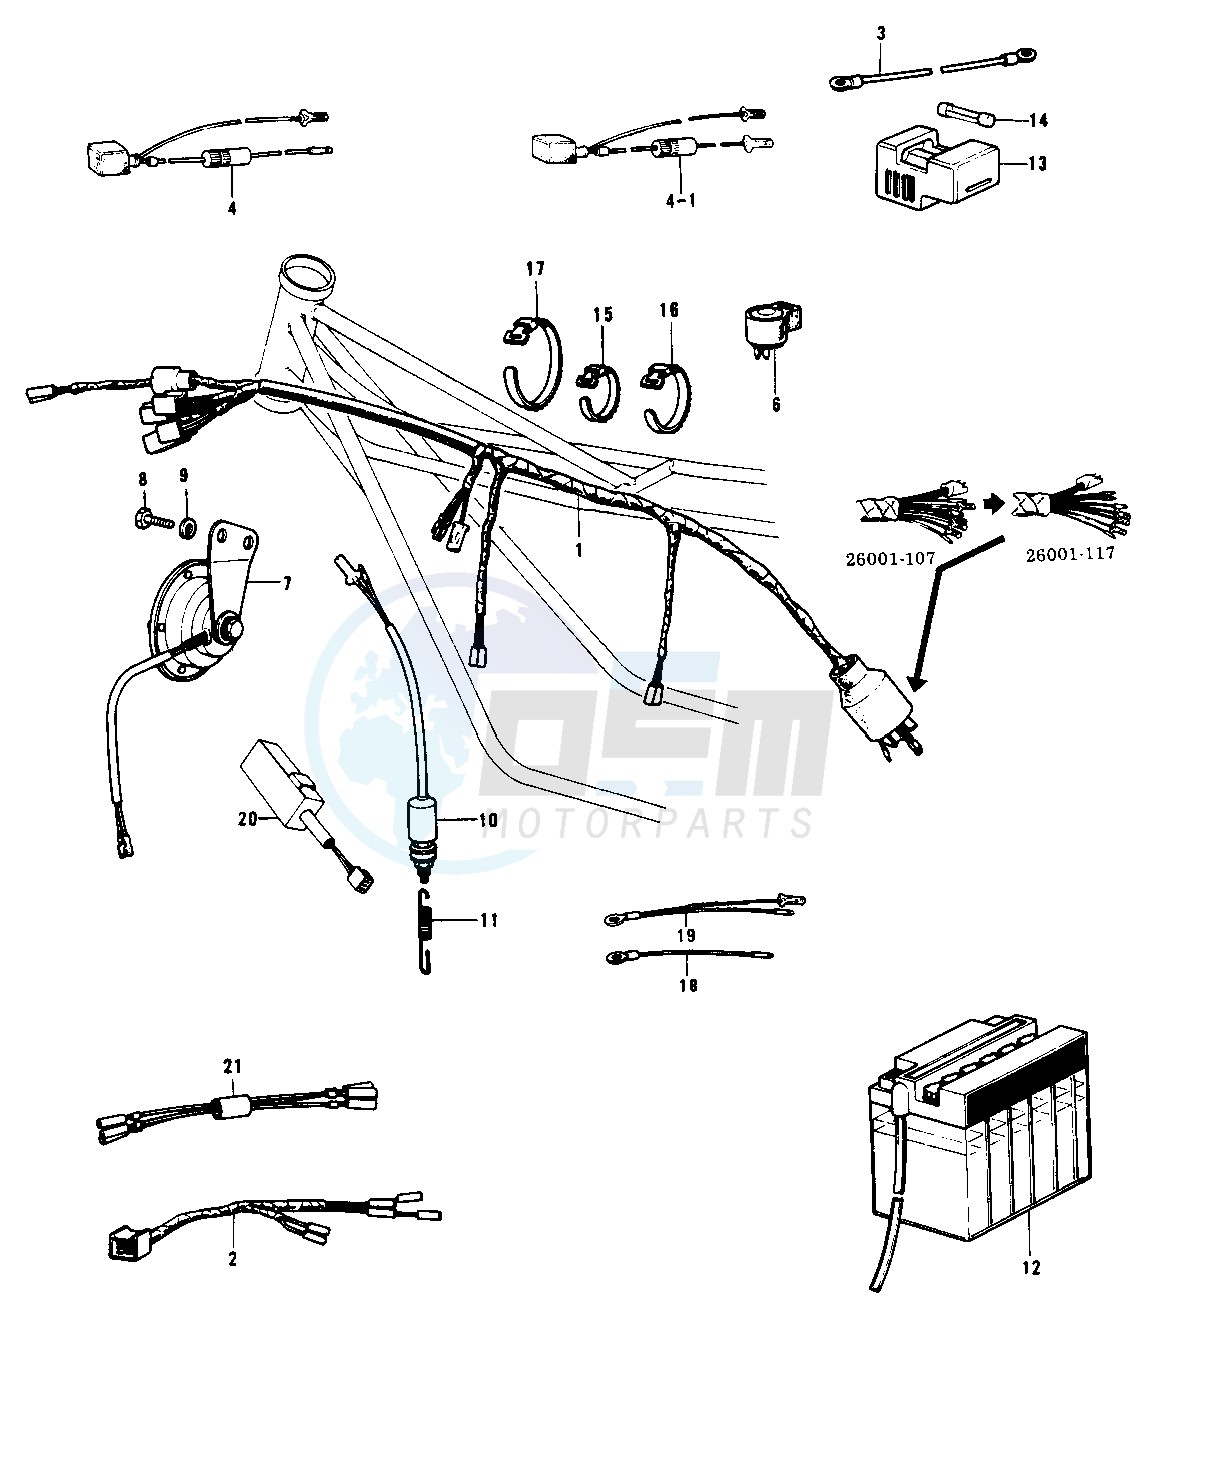 CHASSIS ELECTRICAL EQUIPMENT -- H1-D_E_F- - blueprint